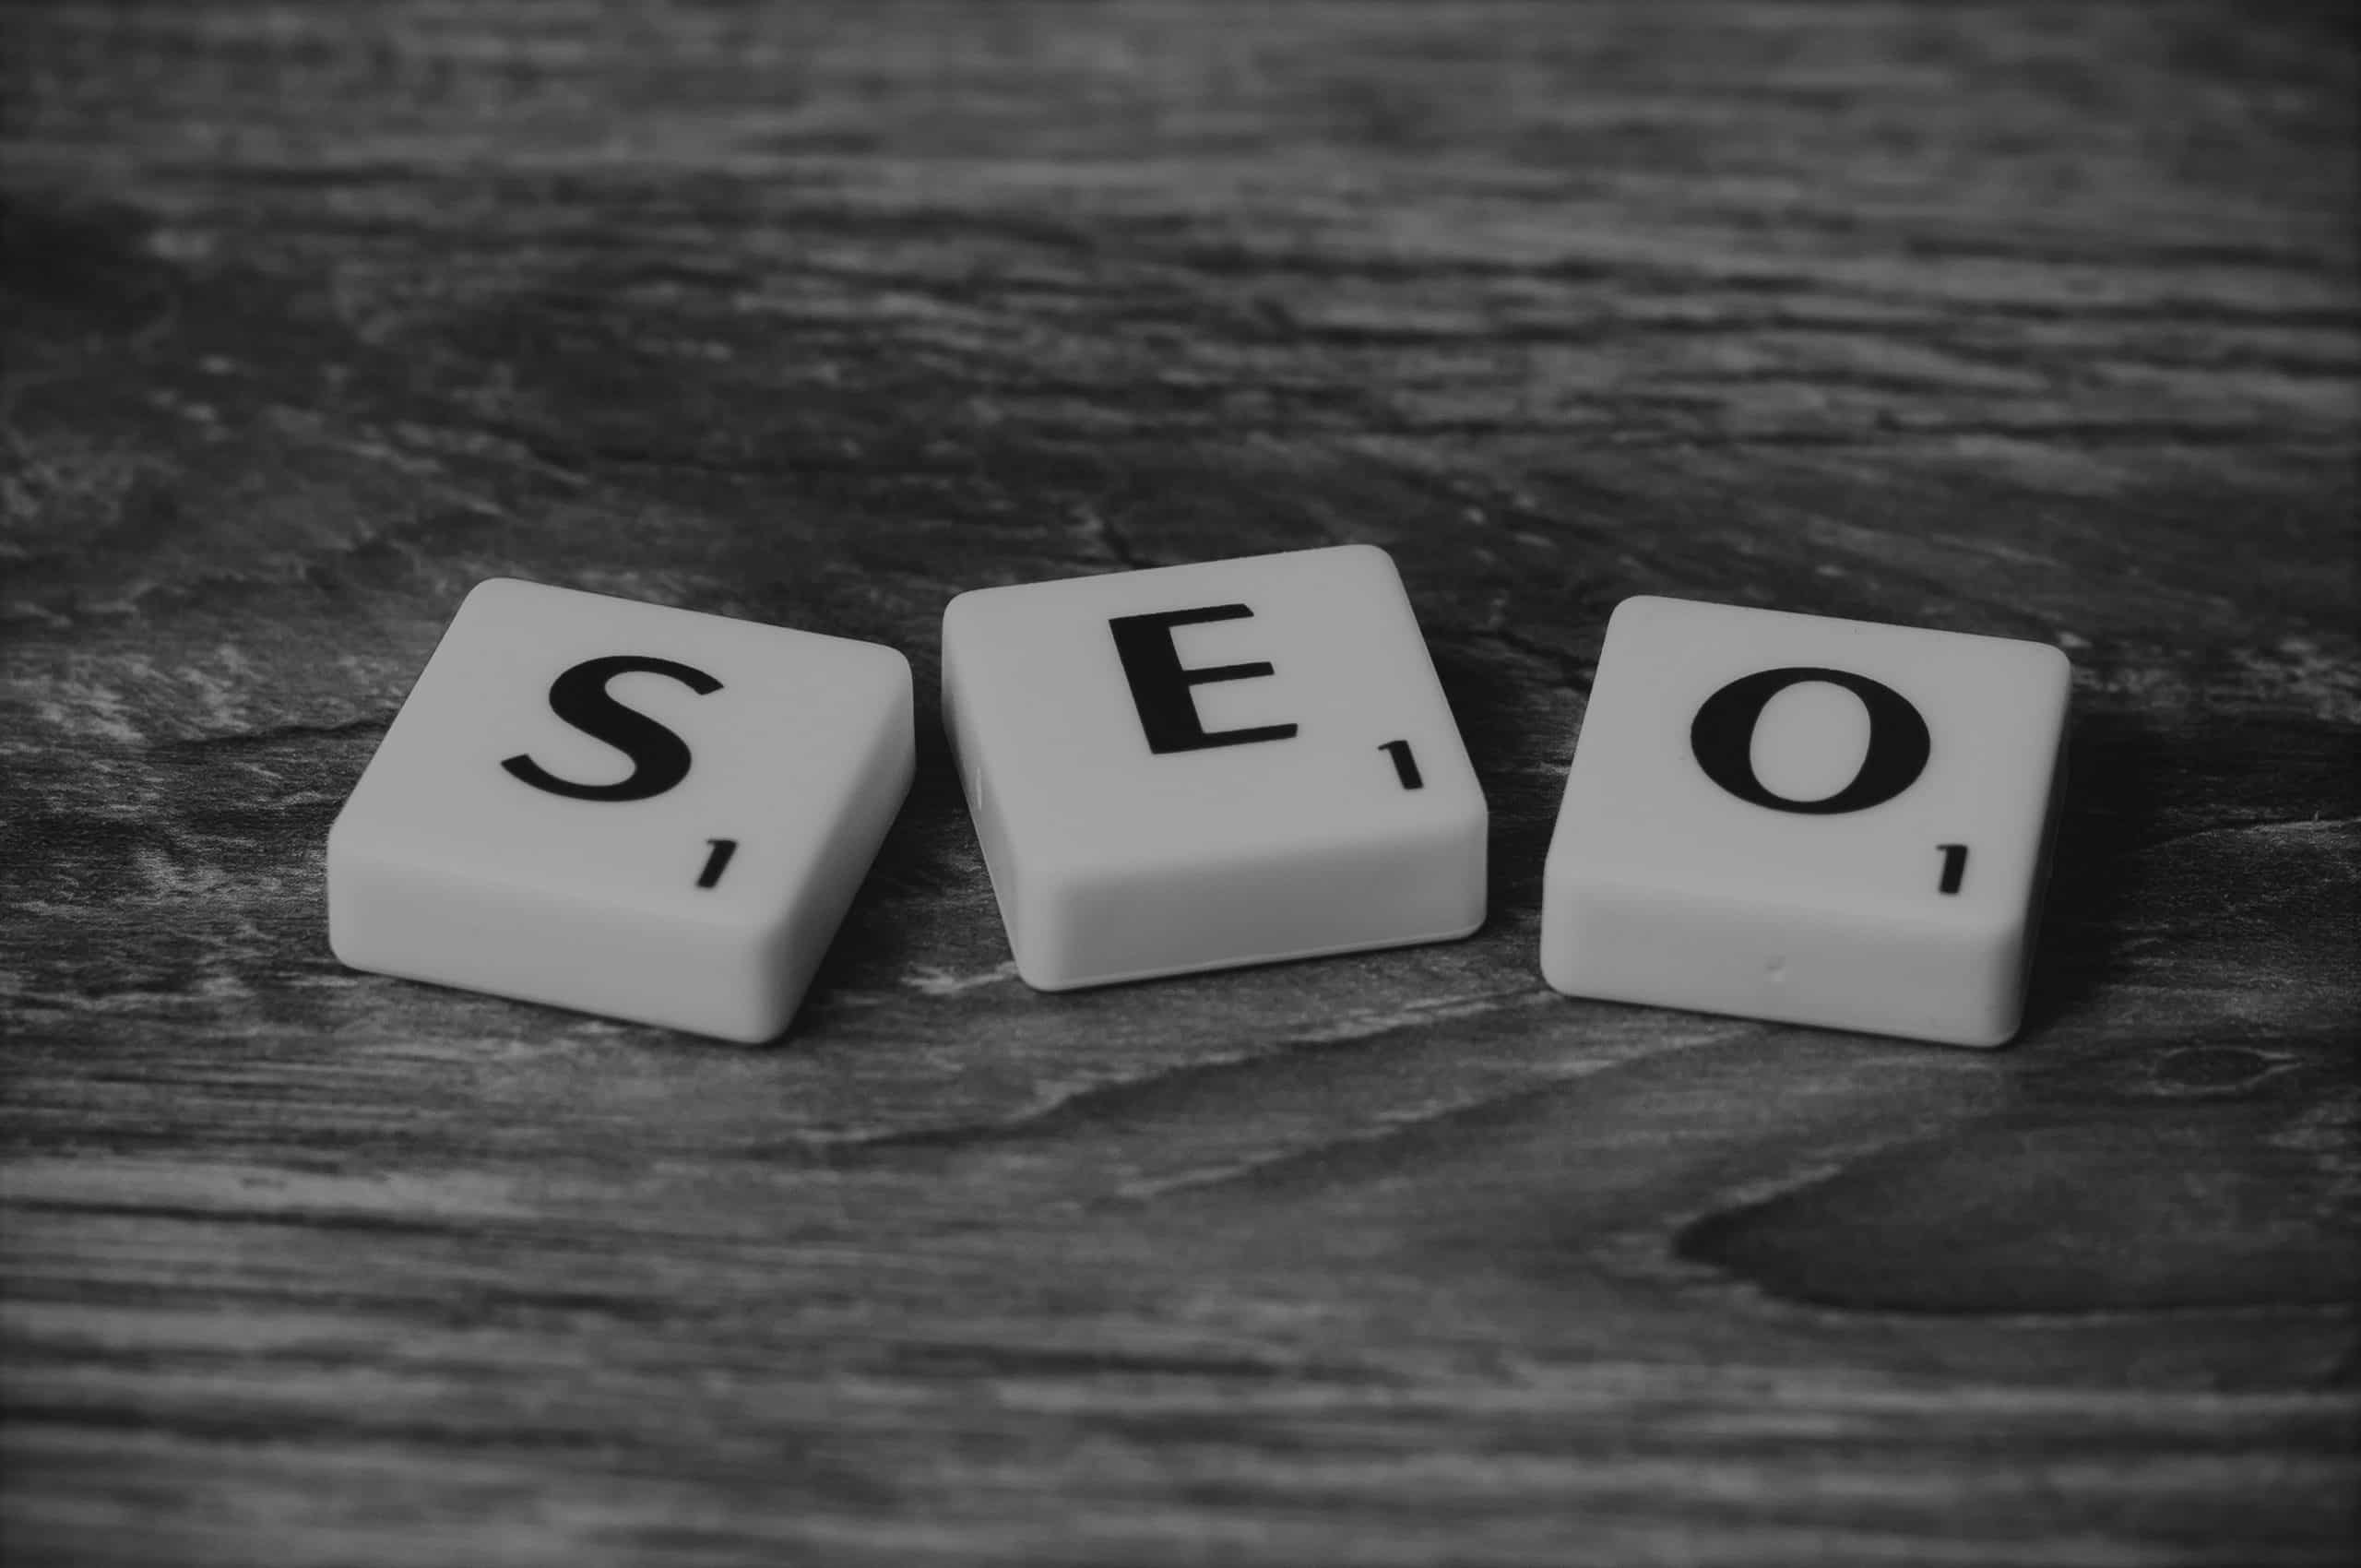 Seo optimization can help a website rank top on google search queries